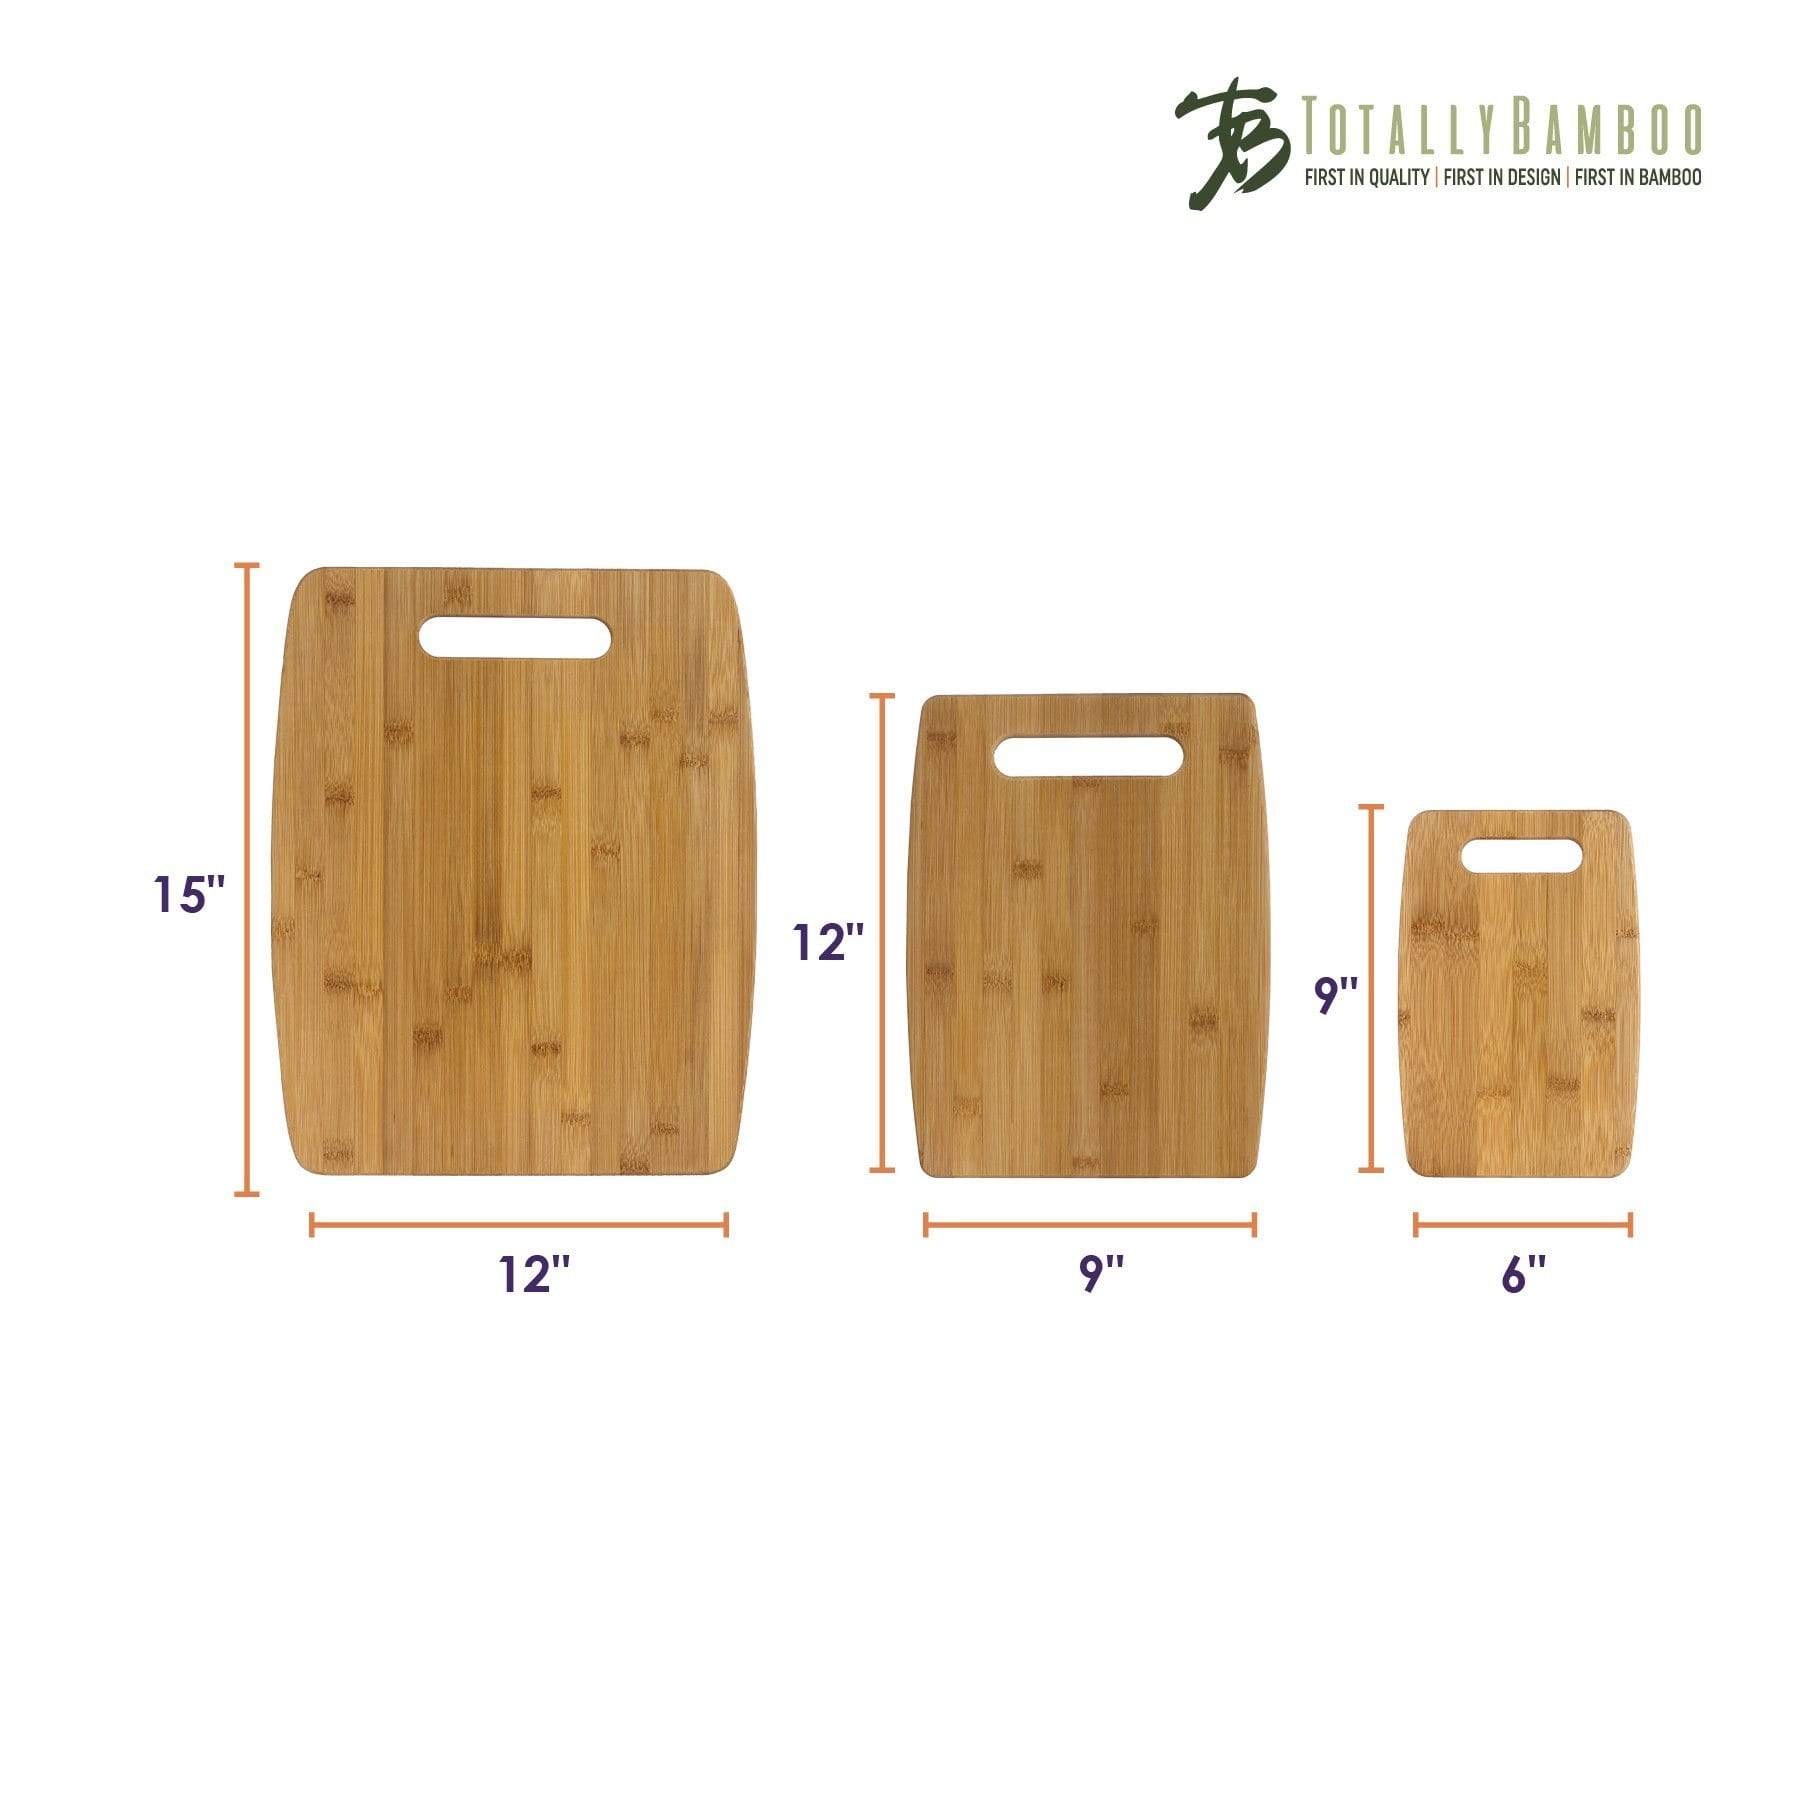 https://totallybamboo.com/cdn/shop/products/3-piece-bamboo-cutting-board-set-15-x-12-12-x-9-and-9-x-6-totally-bamboo-973181.jpg?v=1628133895